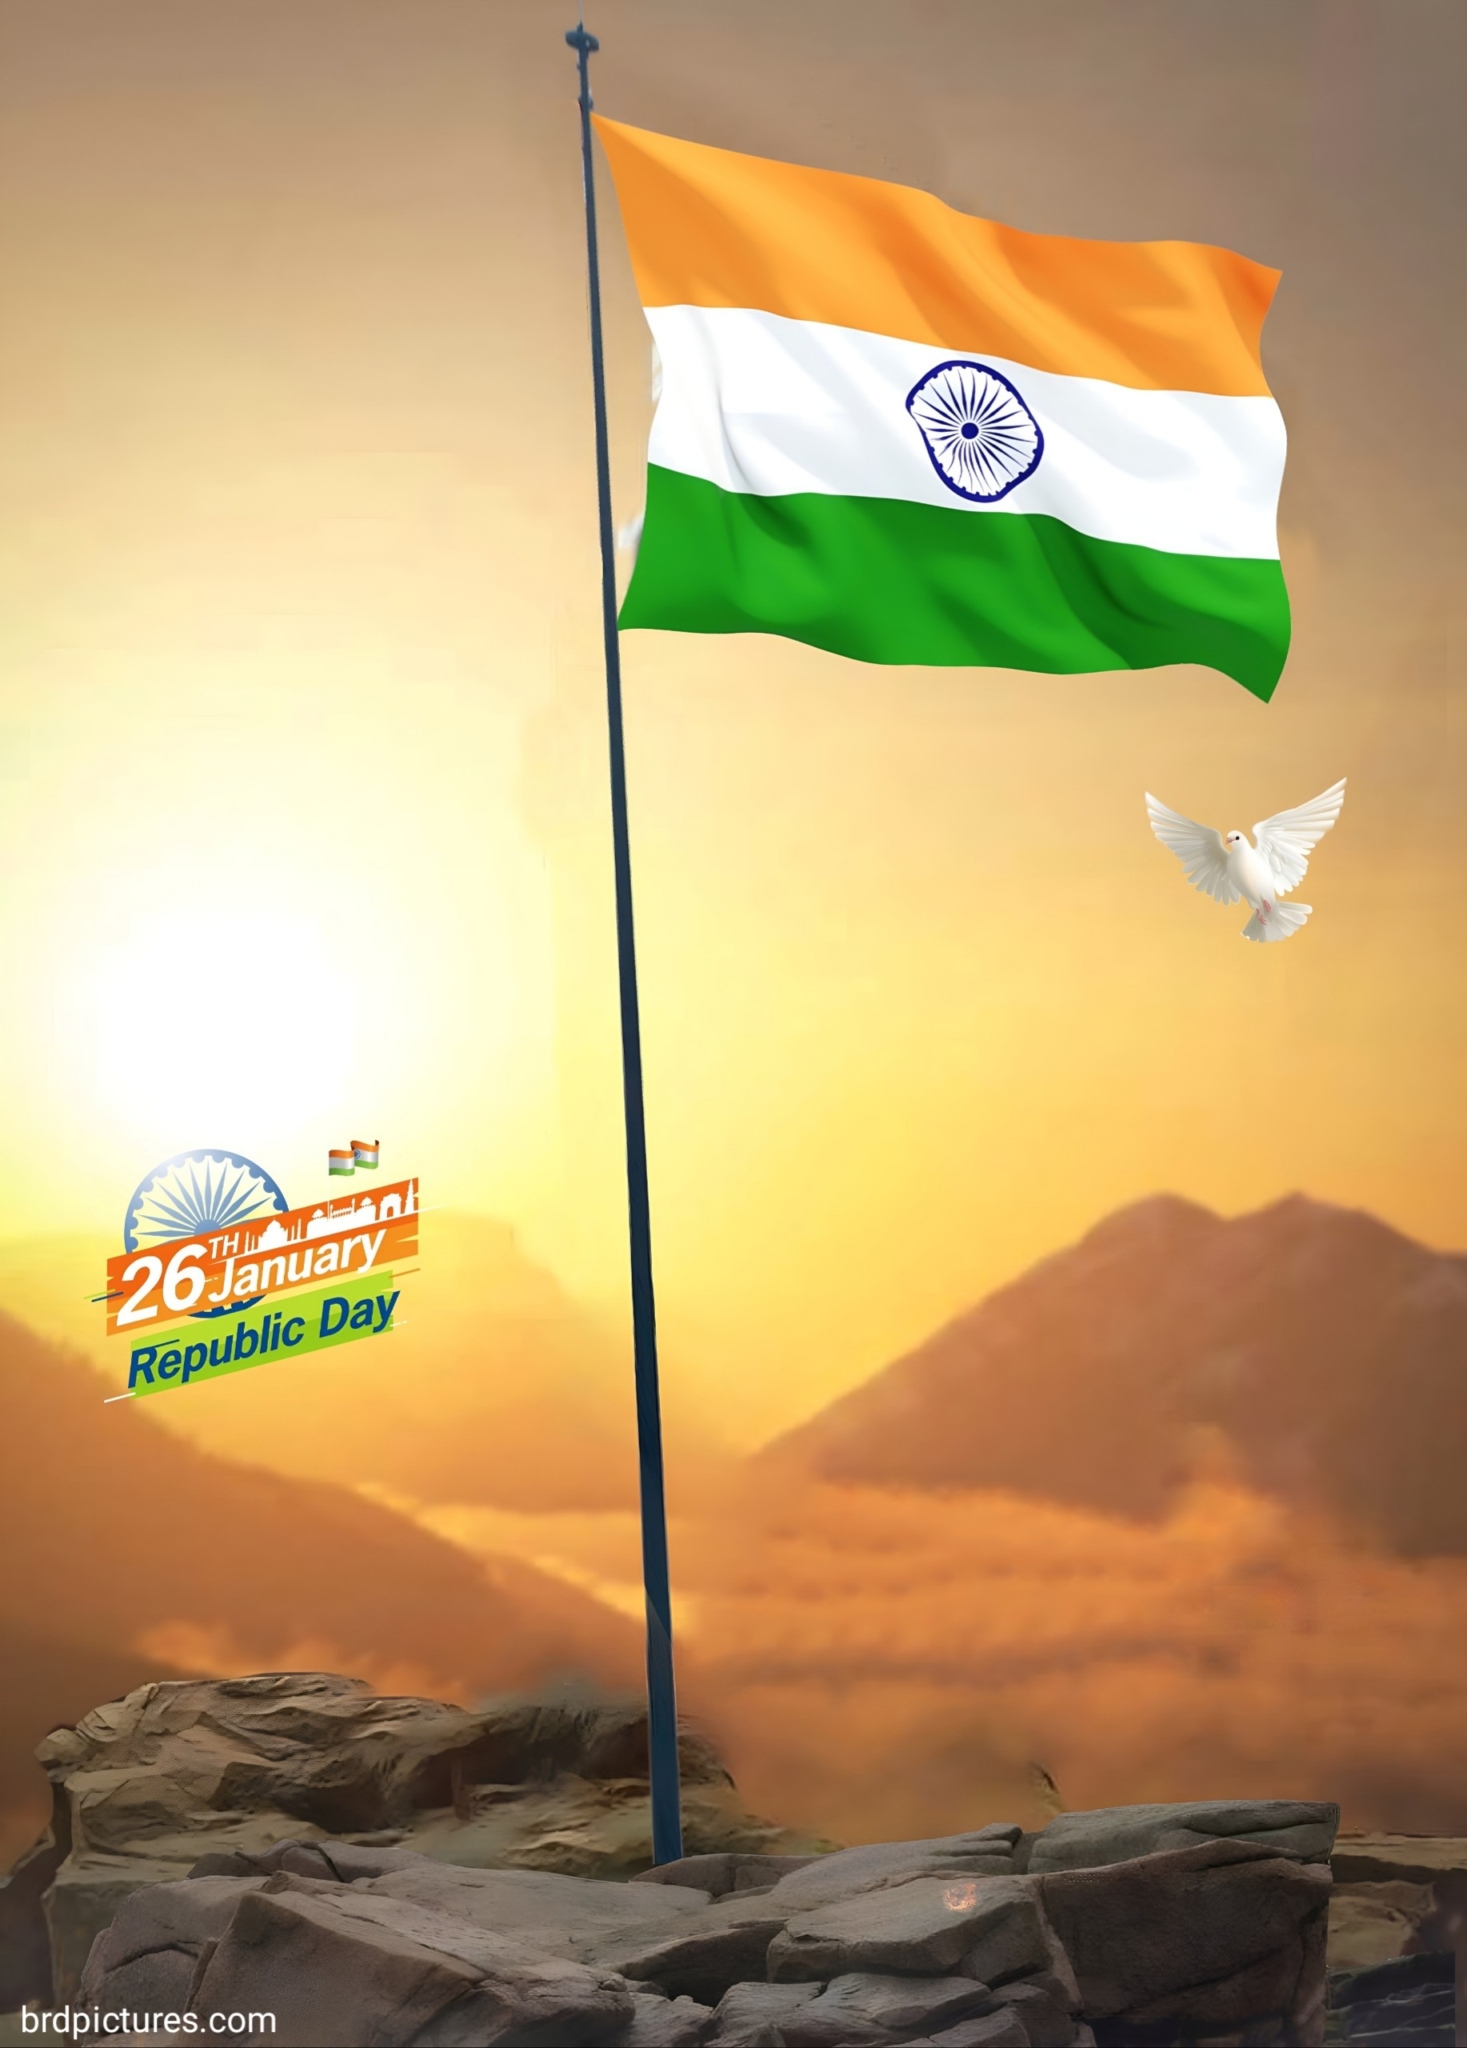 Indian Flag Background Wallpaper 4k For Republic Day